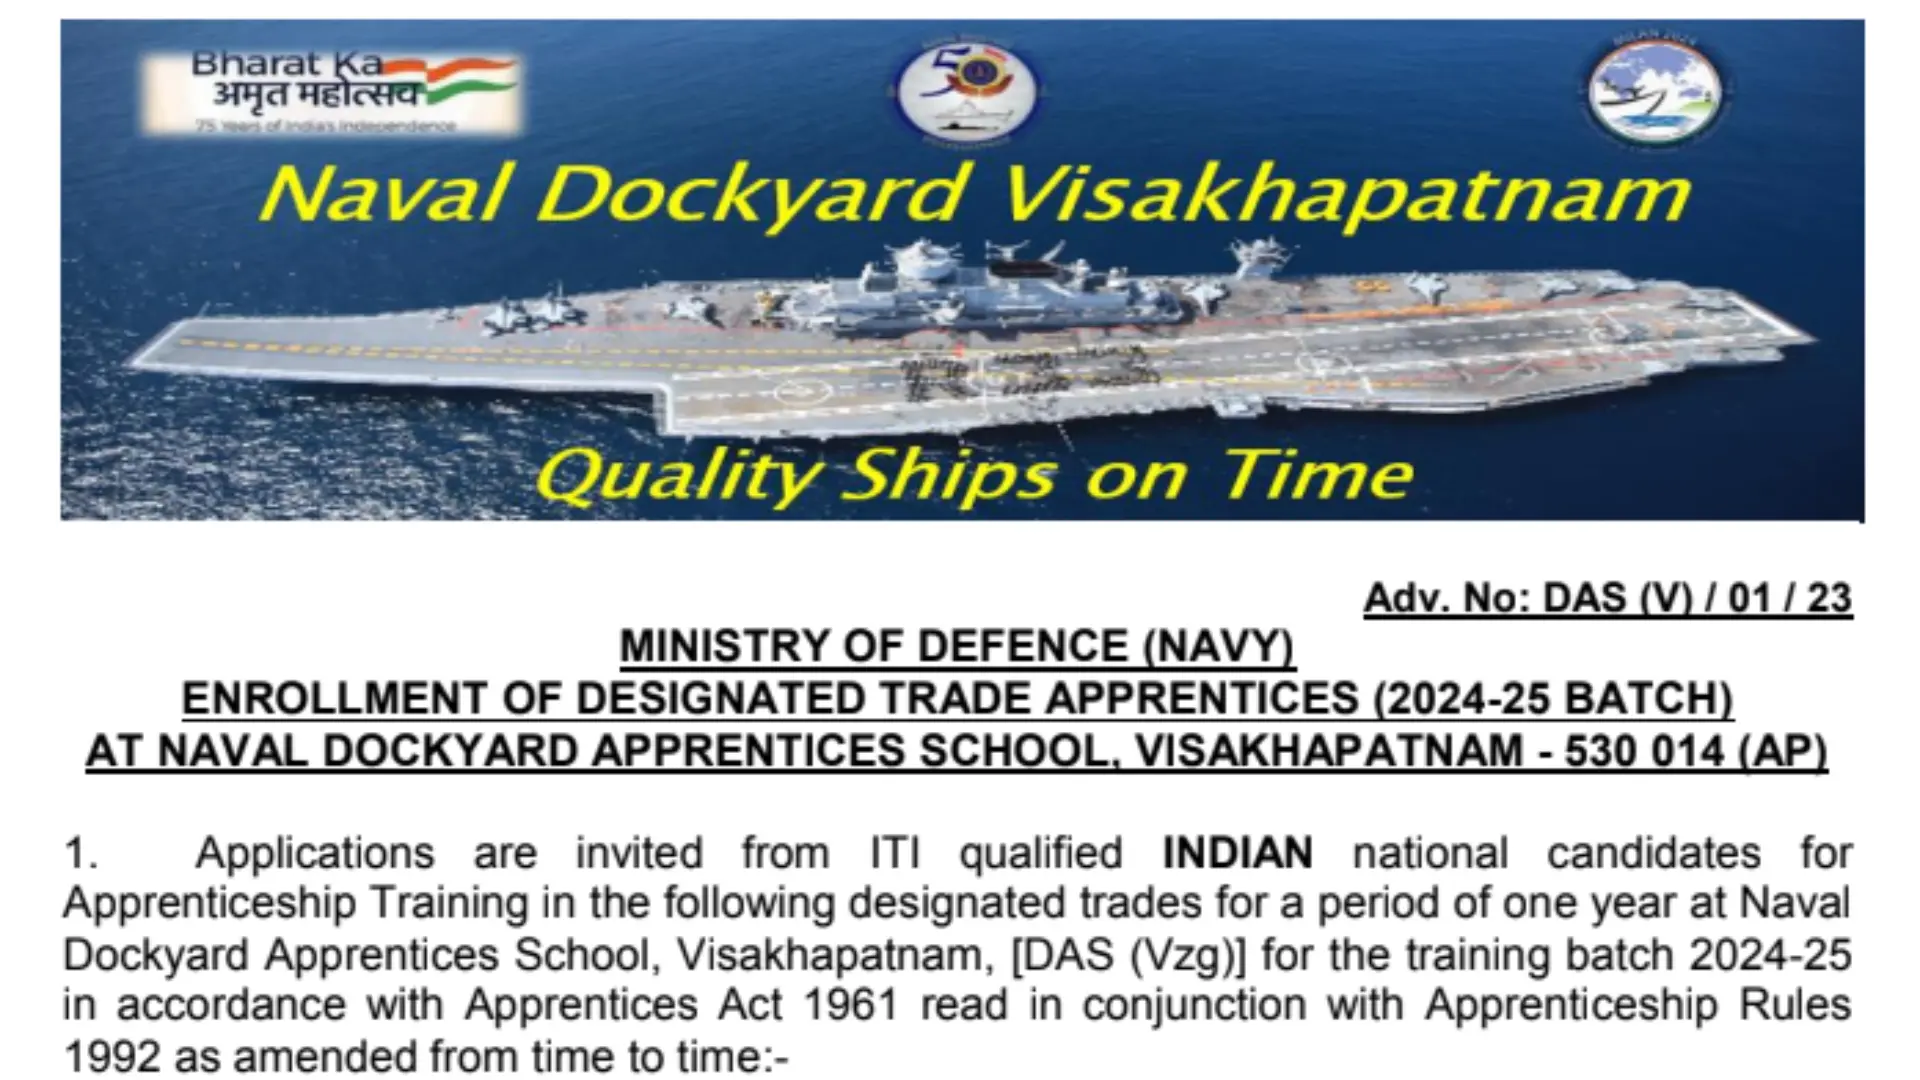 Indian Navy Apprentice Recruitment 2023 Notification and Application Form